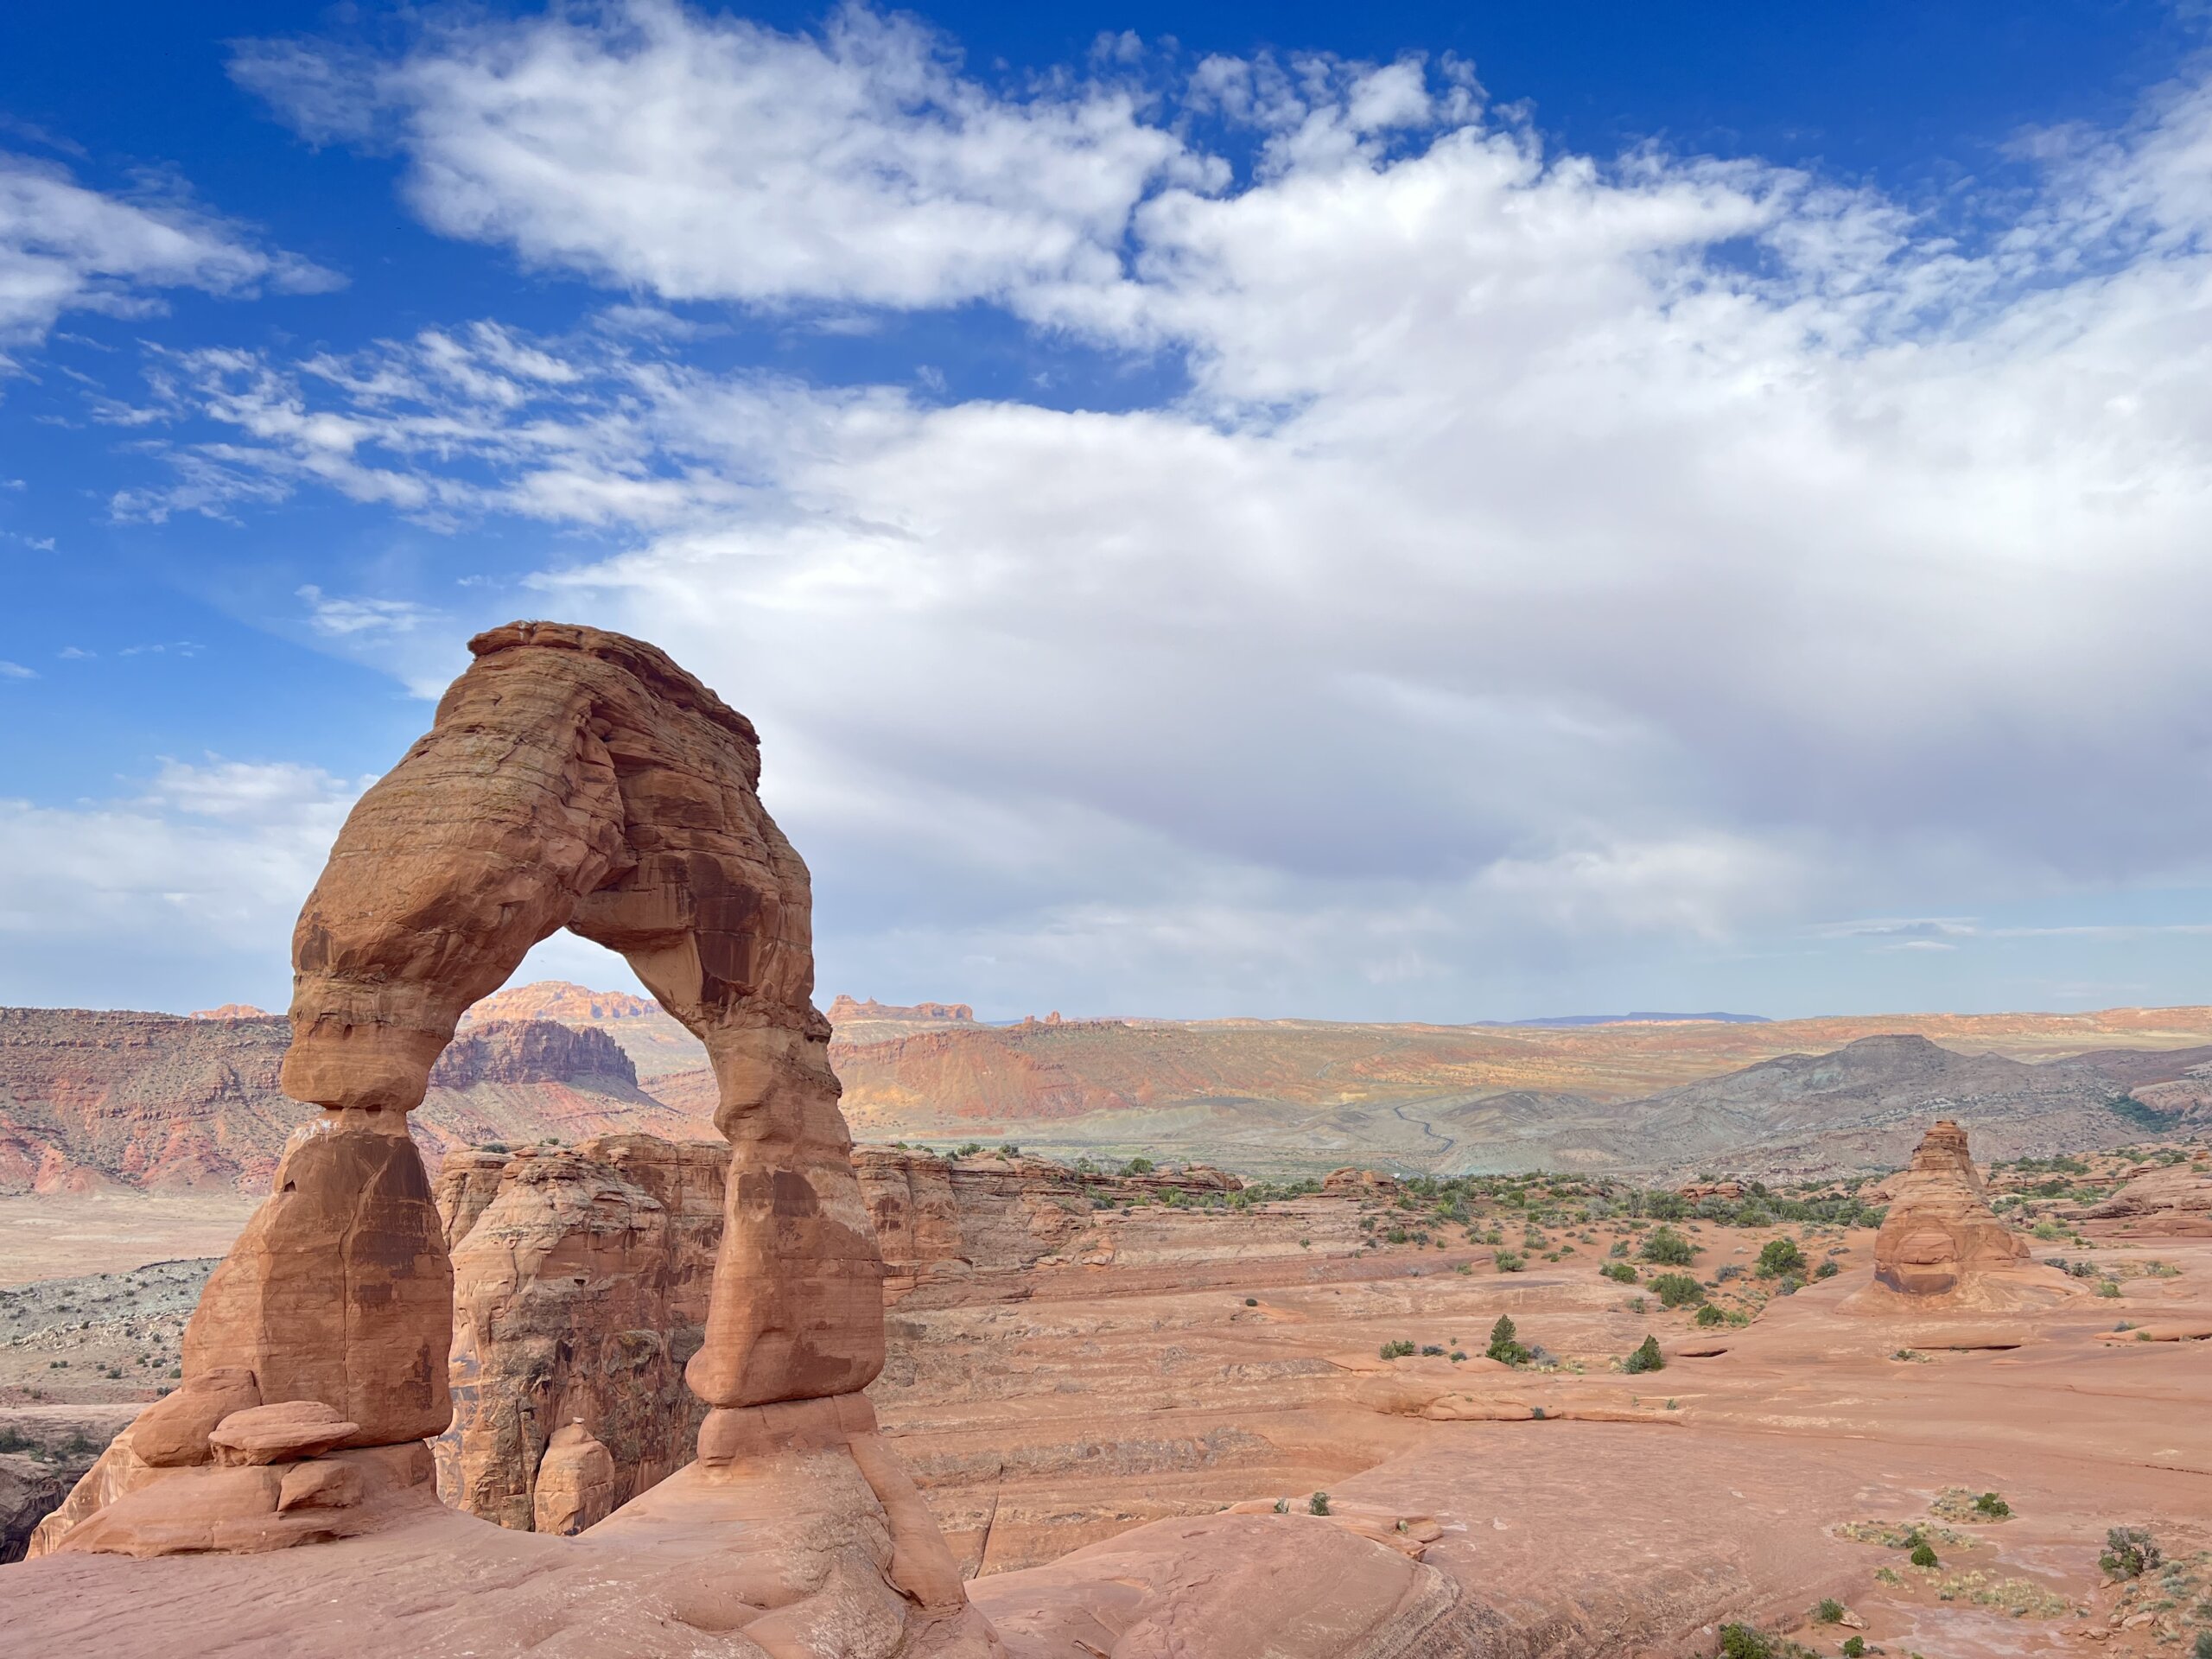 Delicate Arch at Arches National Park is one of the most famous hikes at the park. Many consider Arches National Park to be one of the best national parks in the USA.